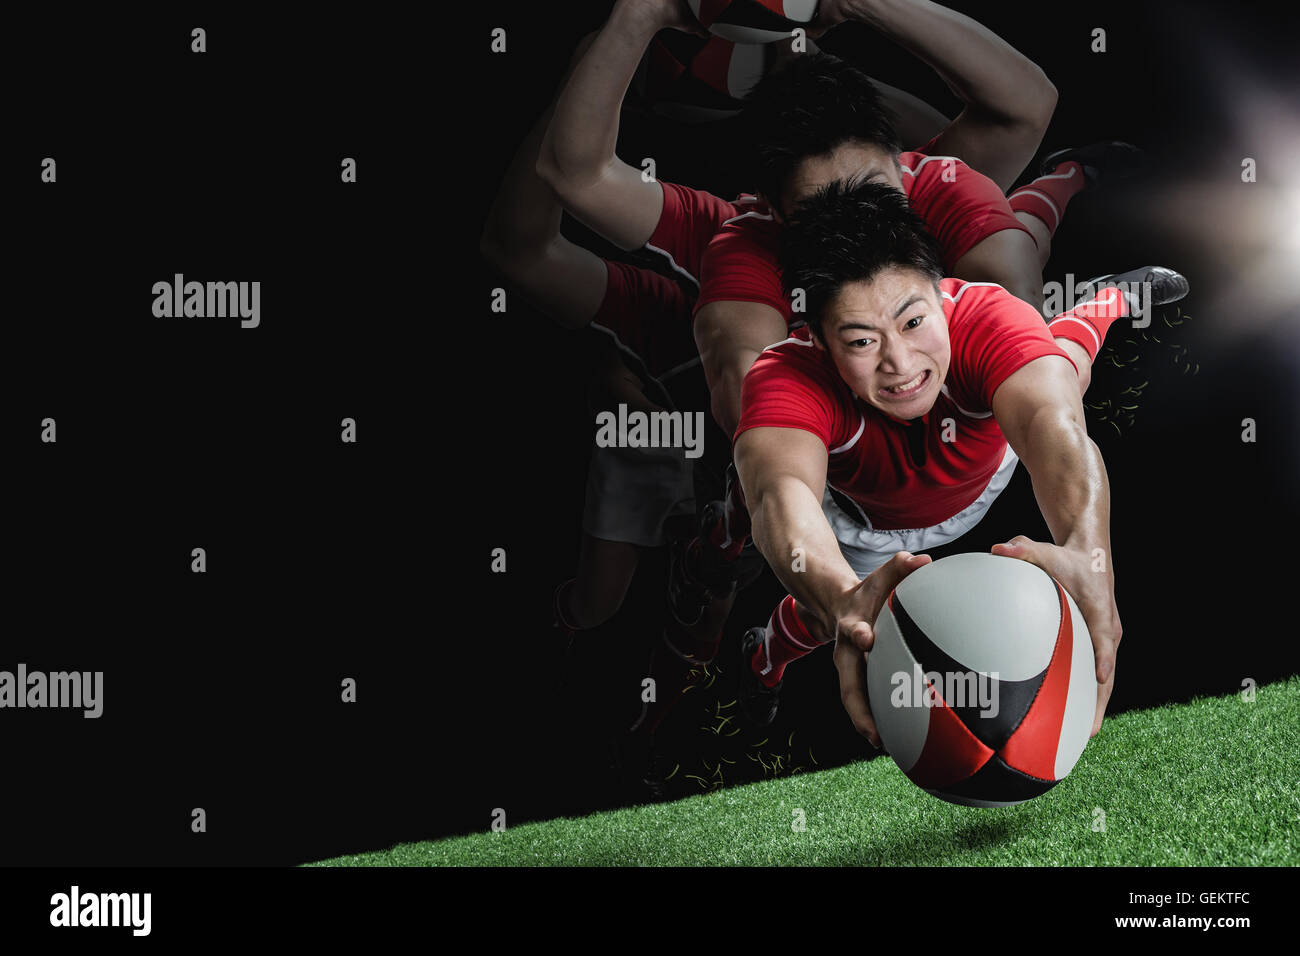 Portrait of Japanese rugby player diving to score a try Stock Photo